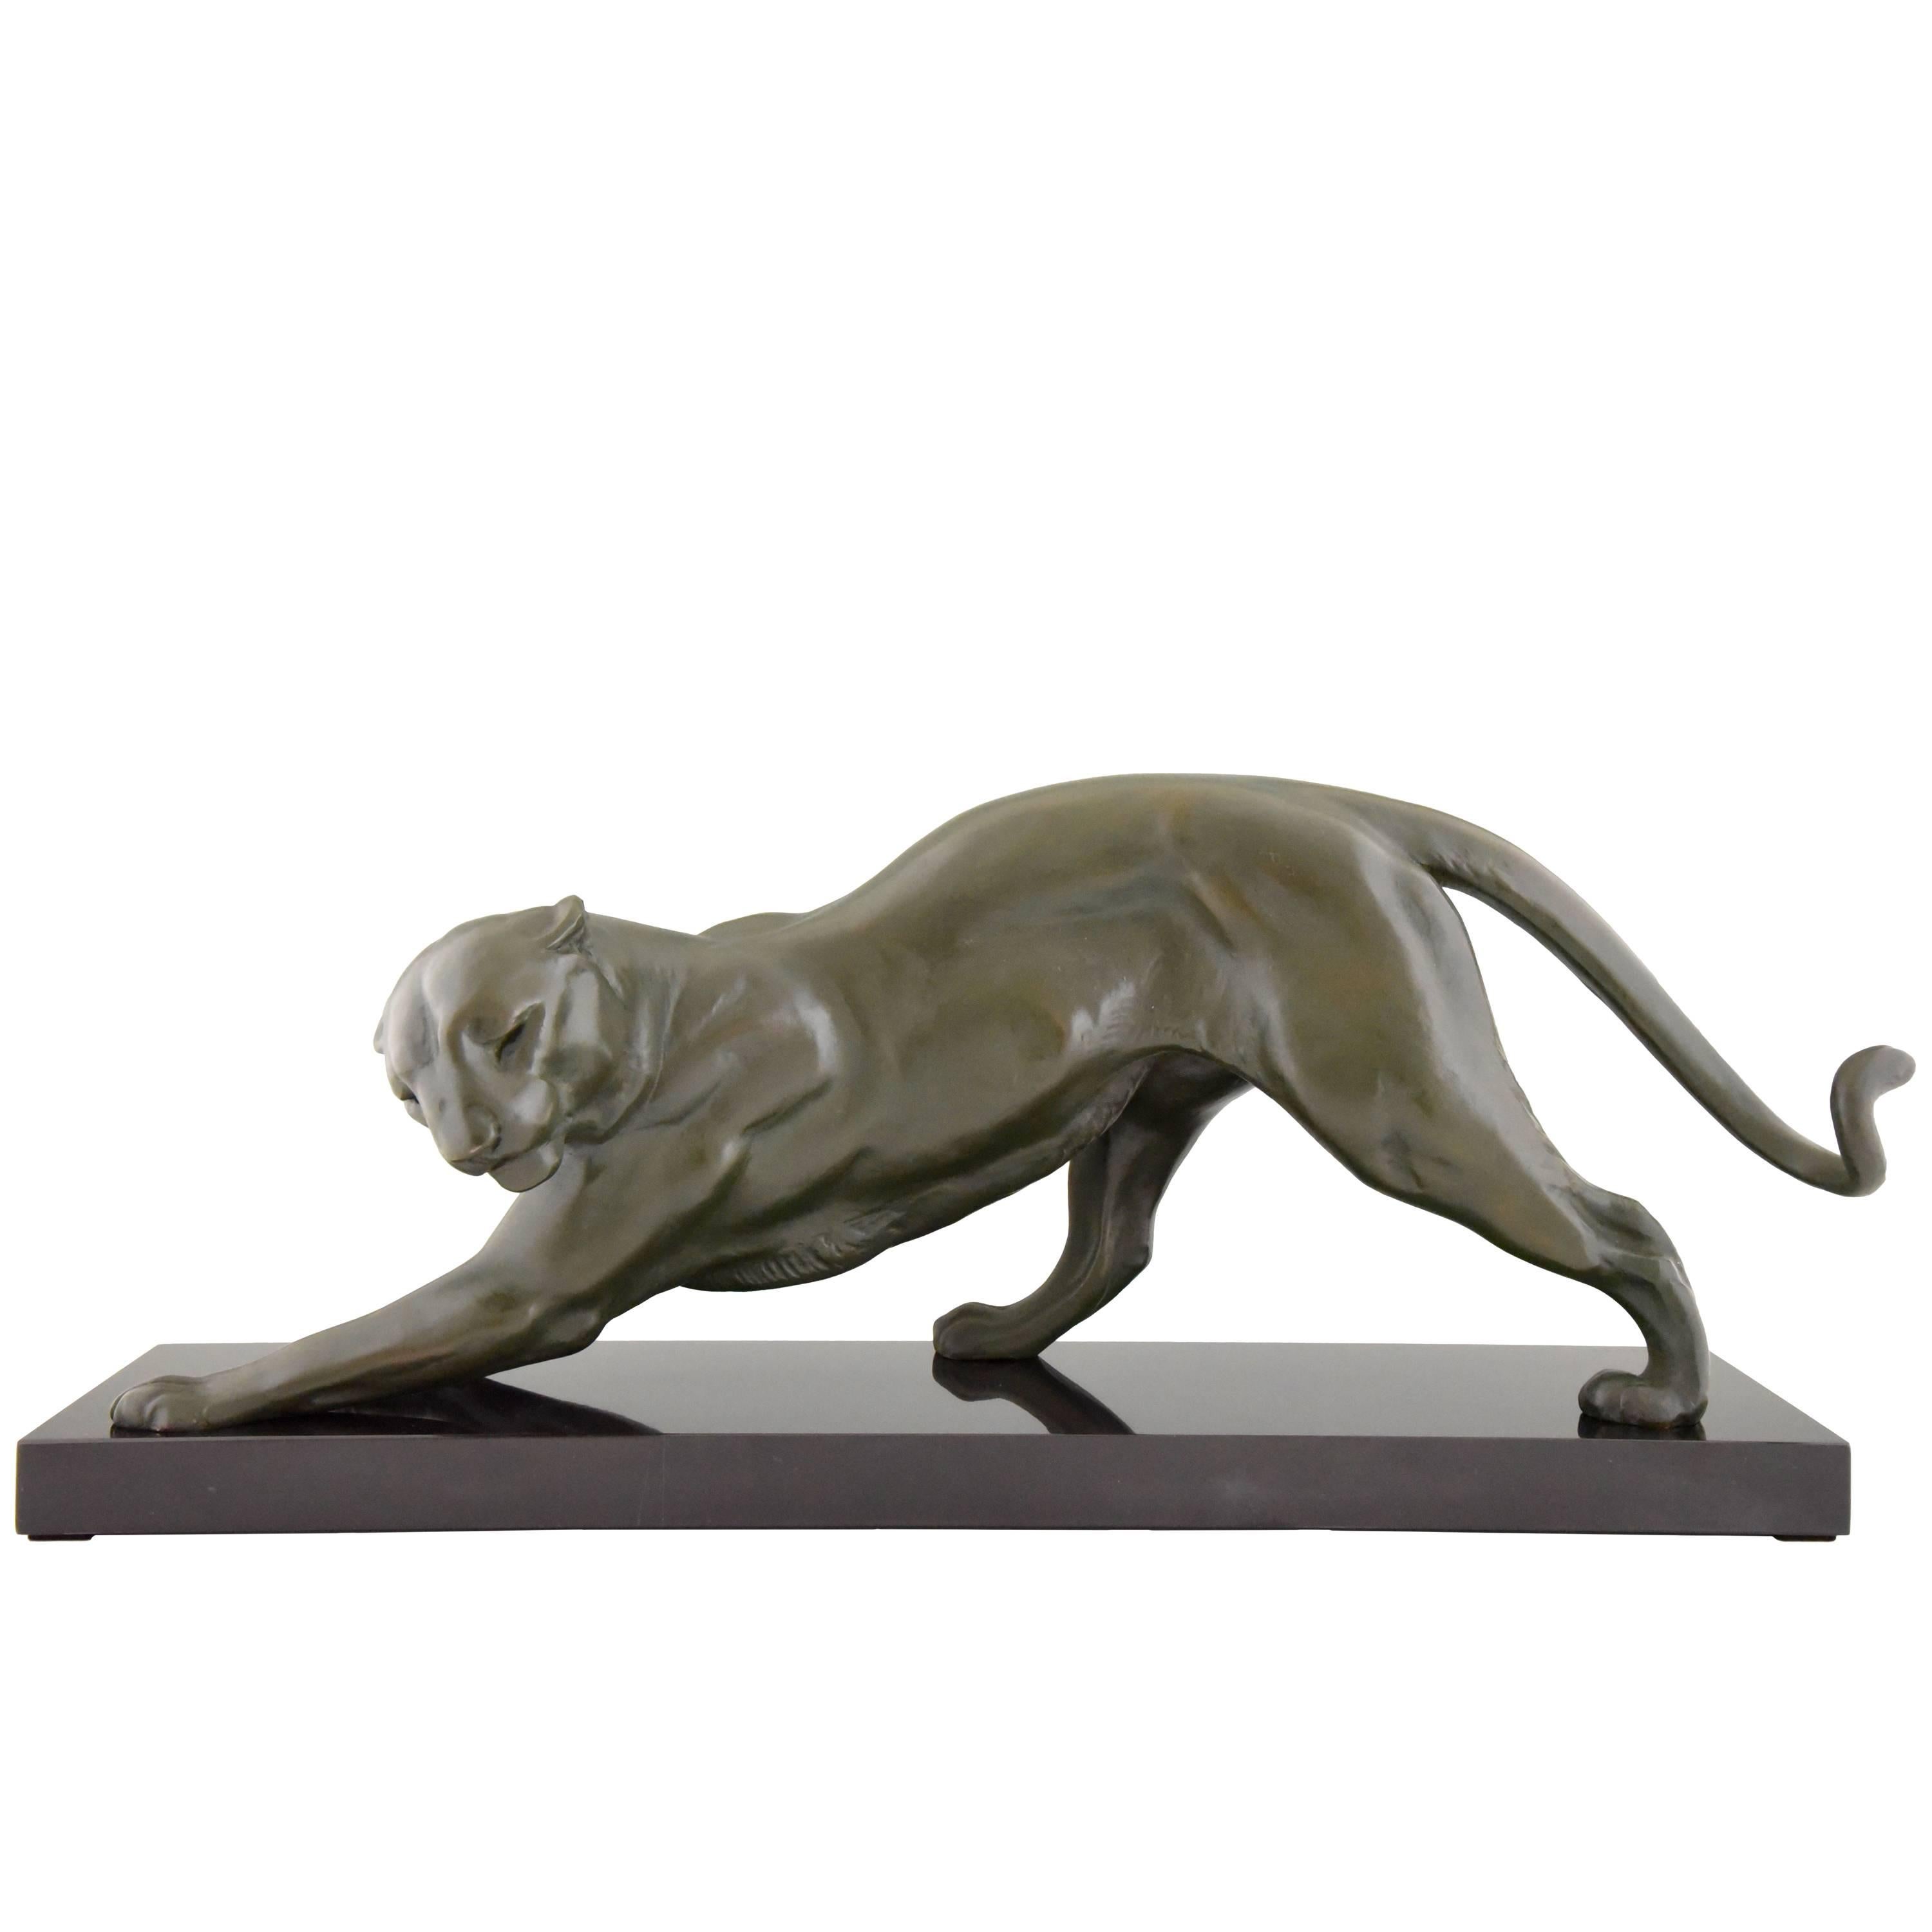 French Art Deco Panther Sculpture by Plagnet, 1930